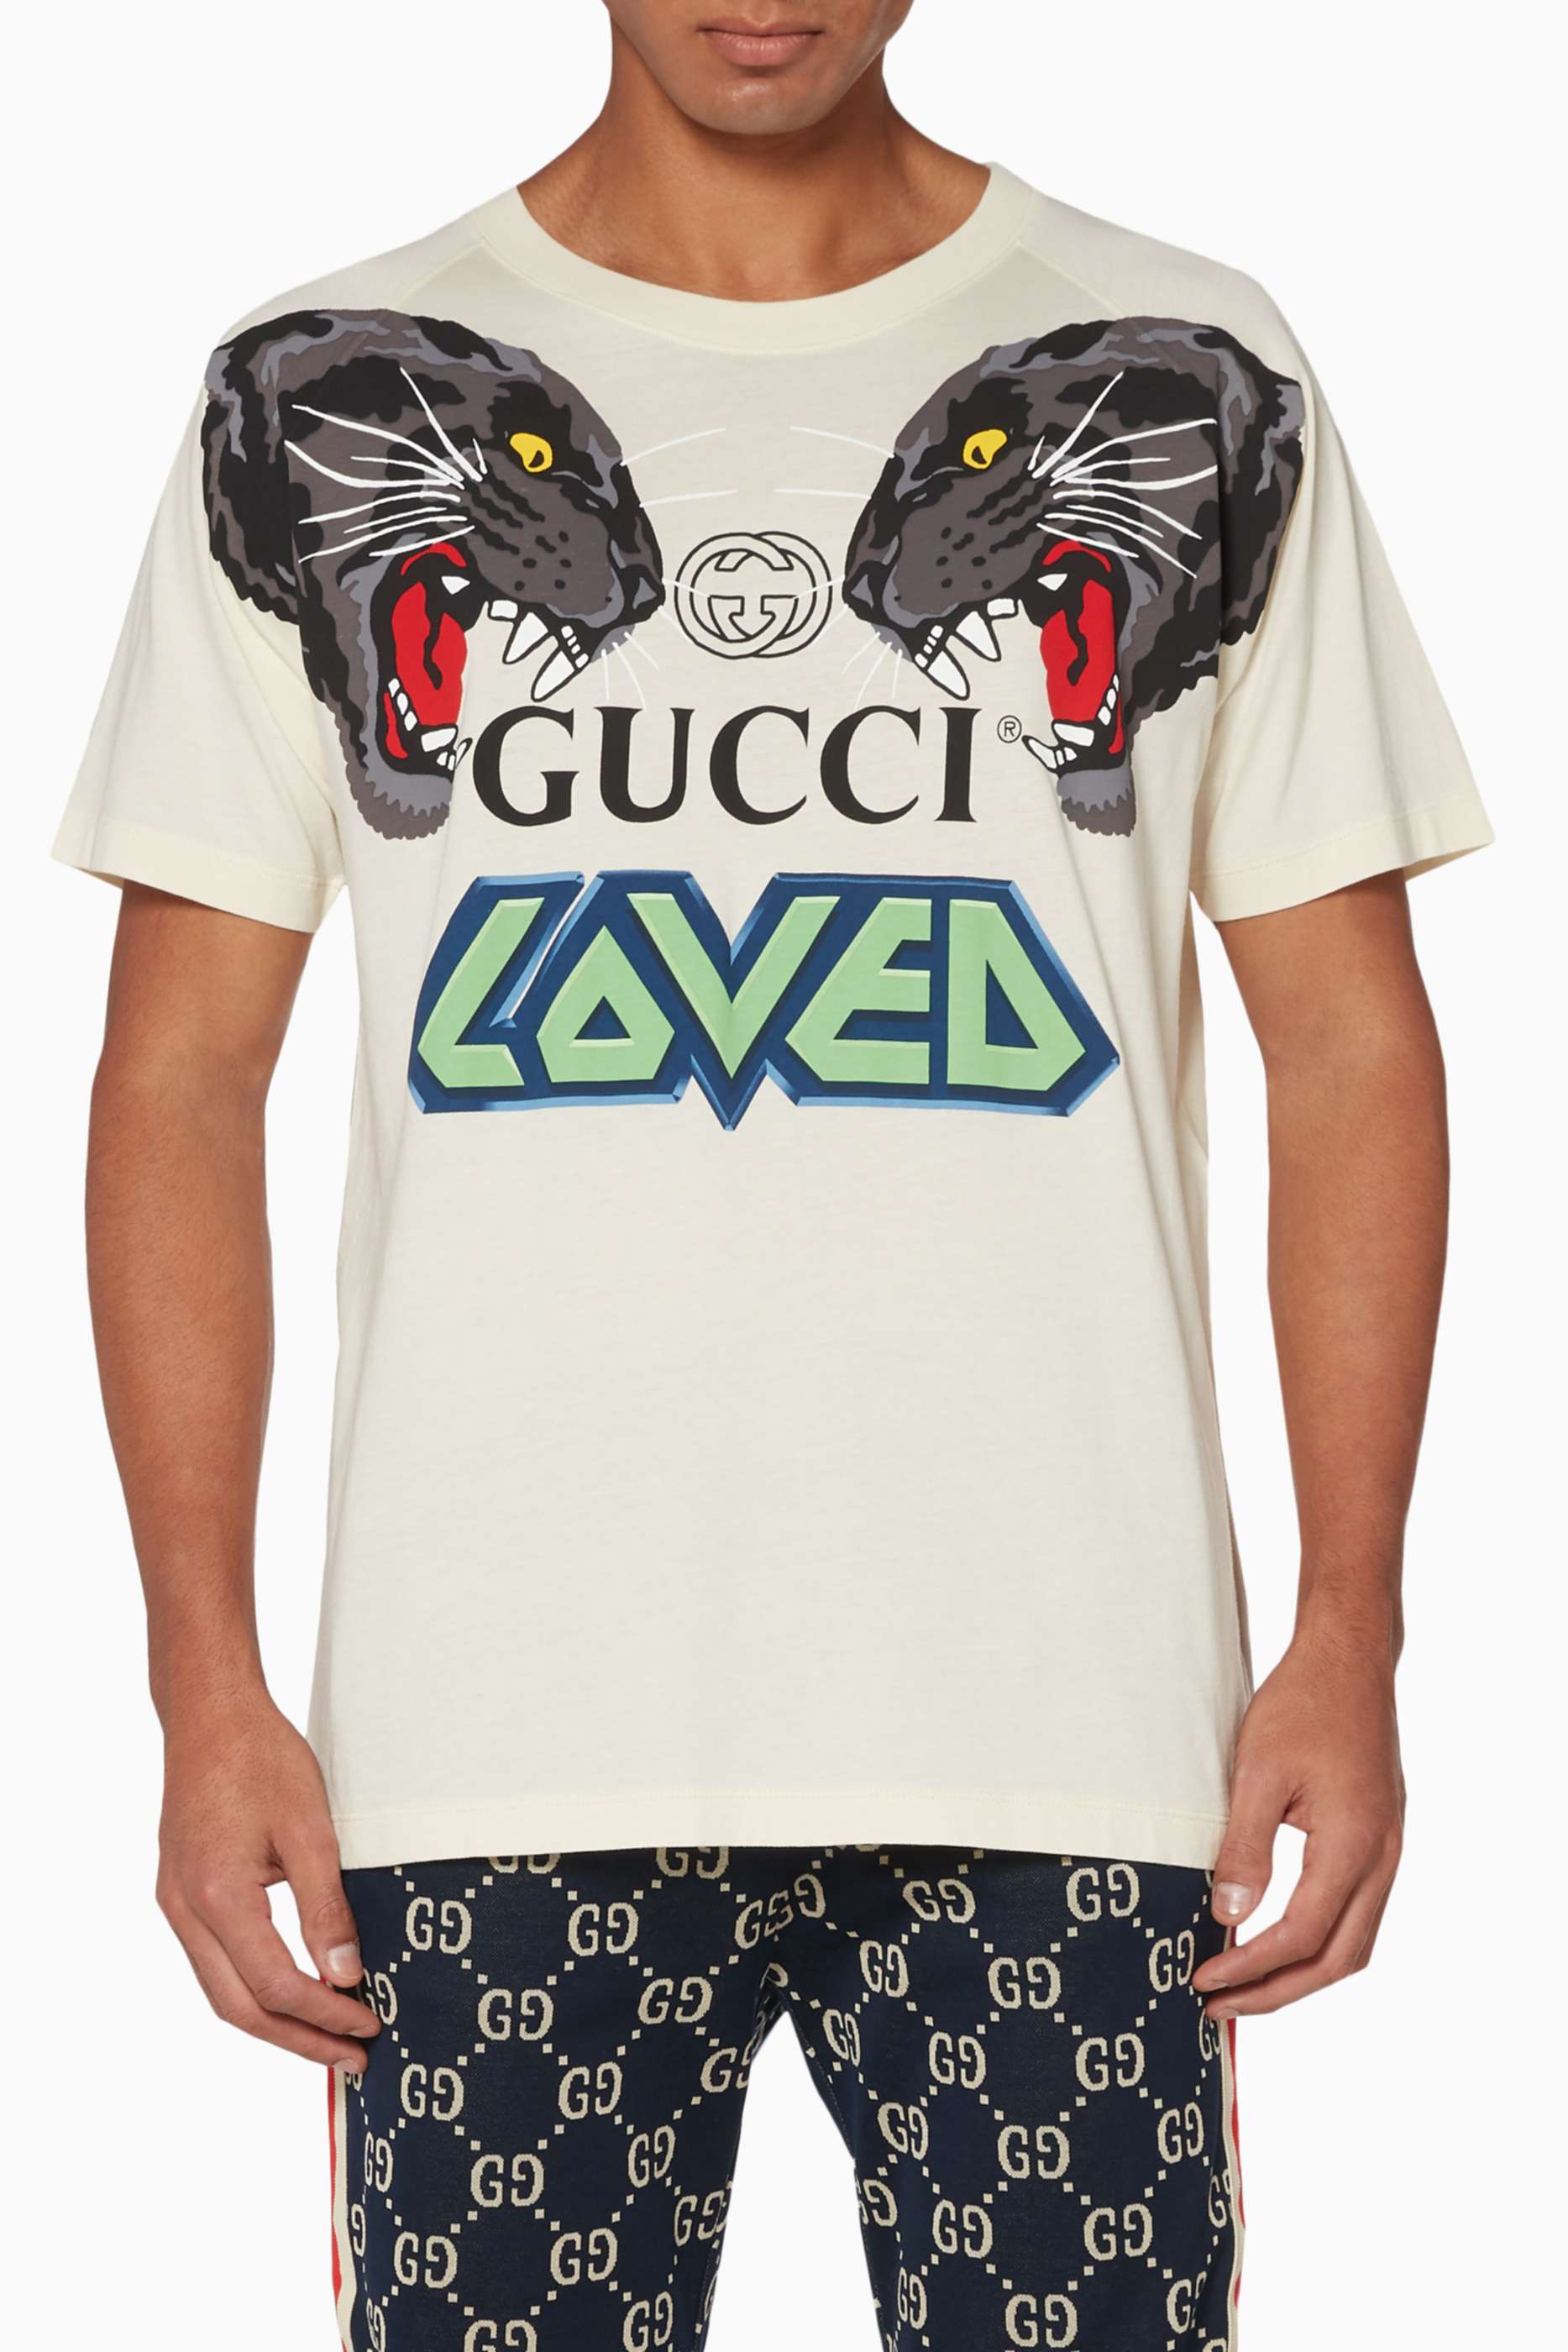 gucci loved t shirt, OFF 79%,Buy!